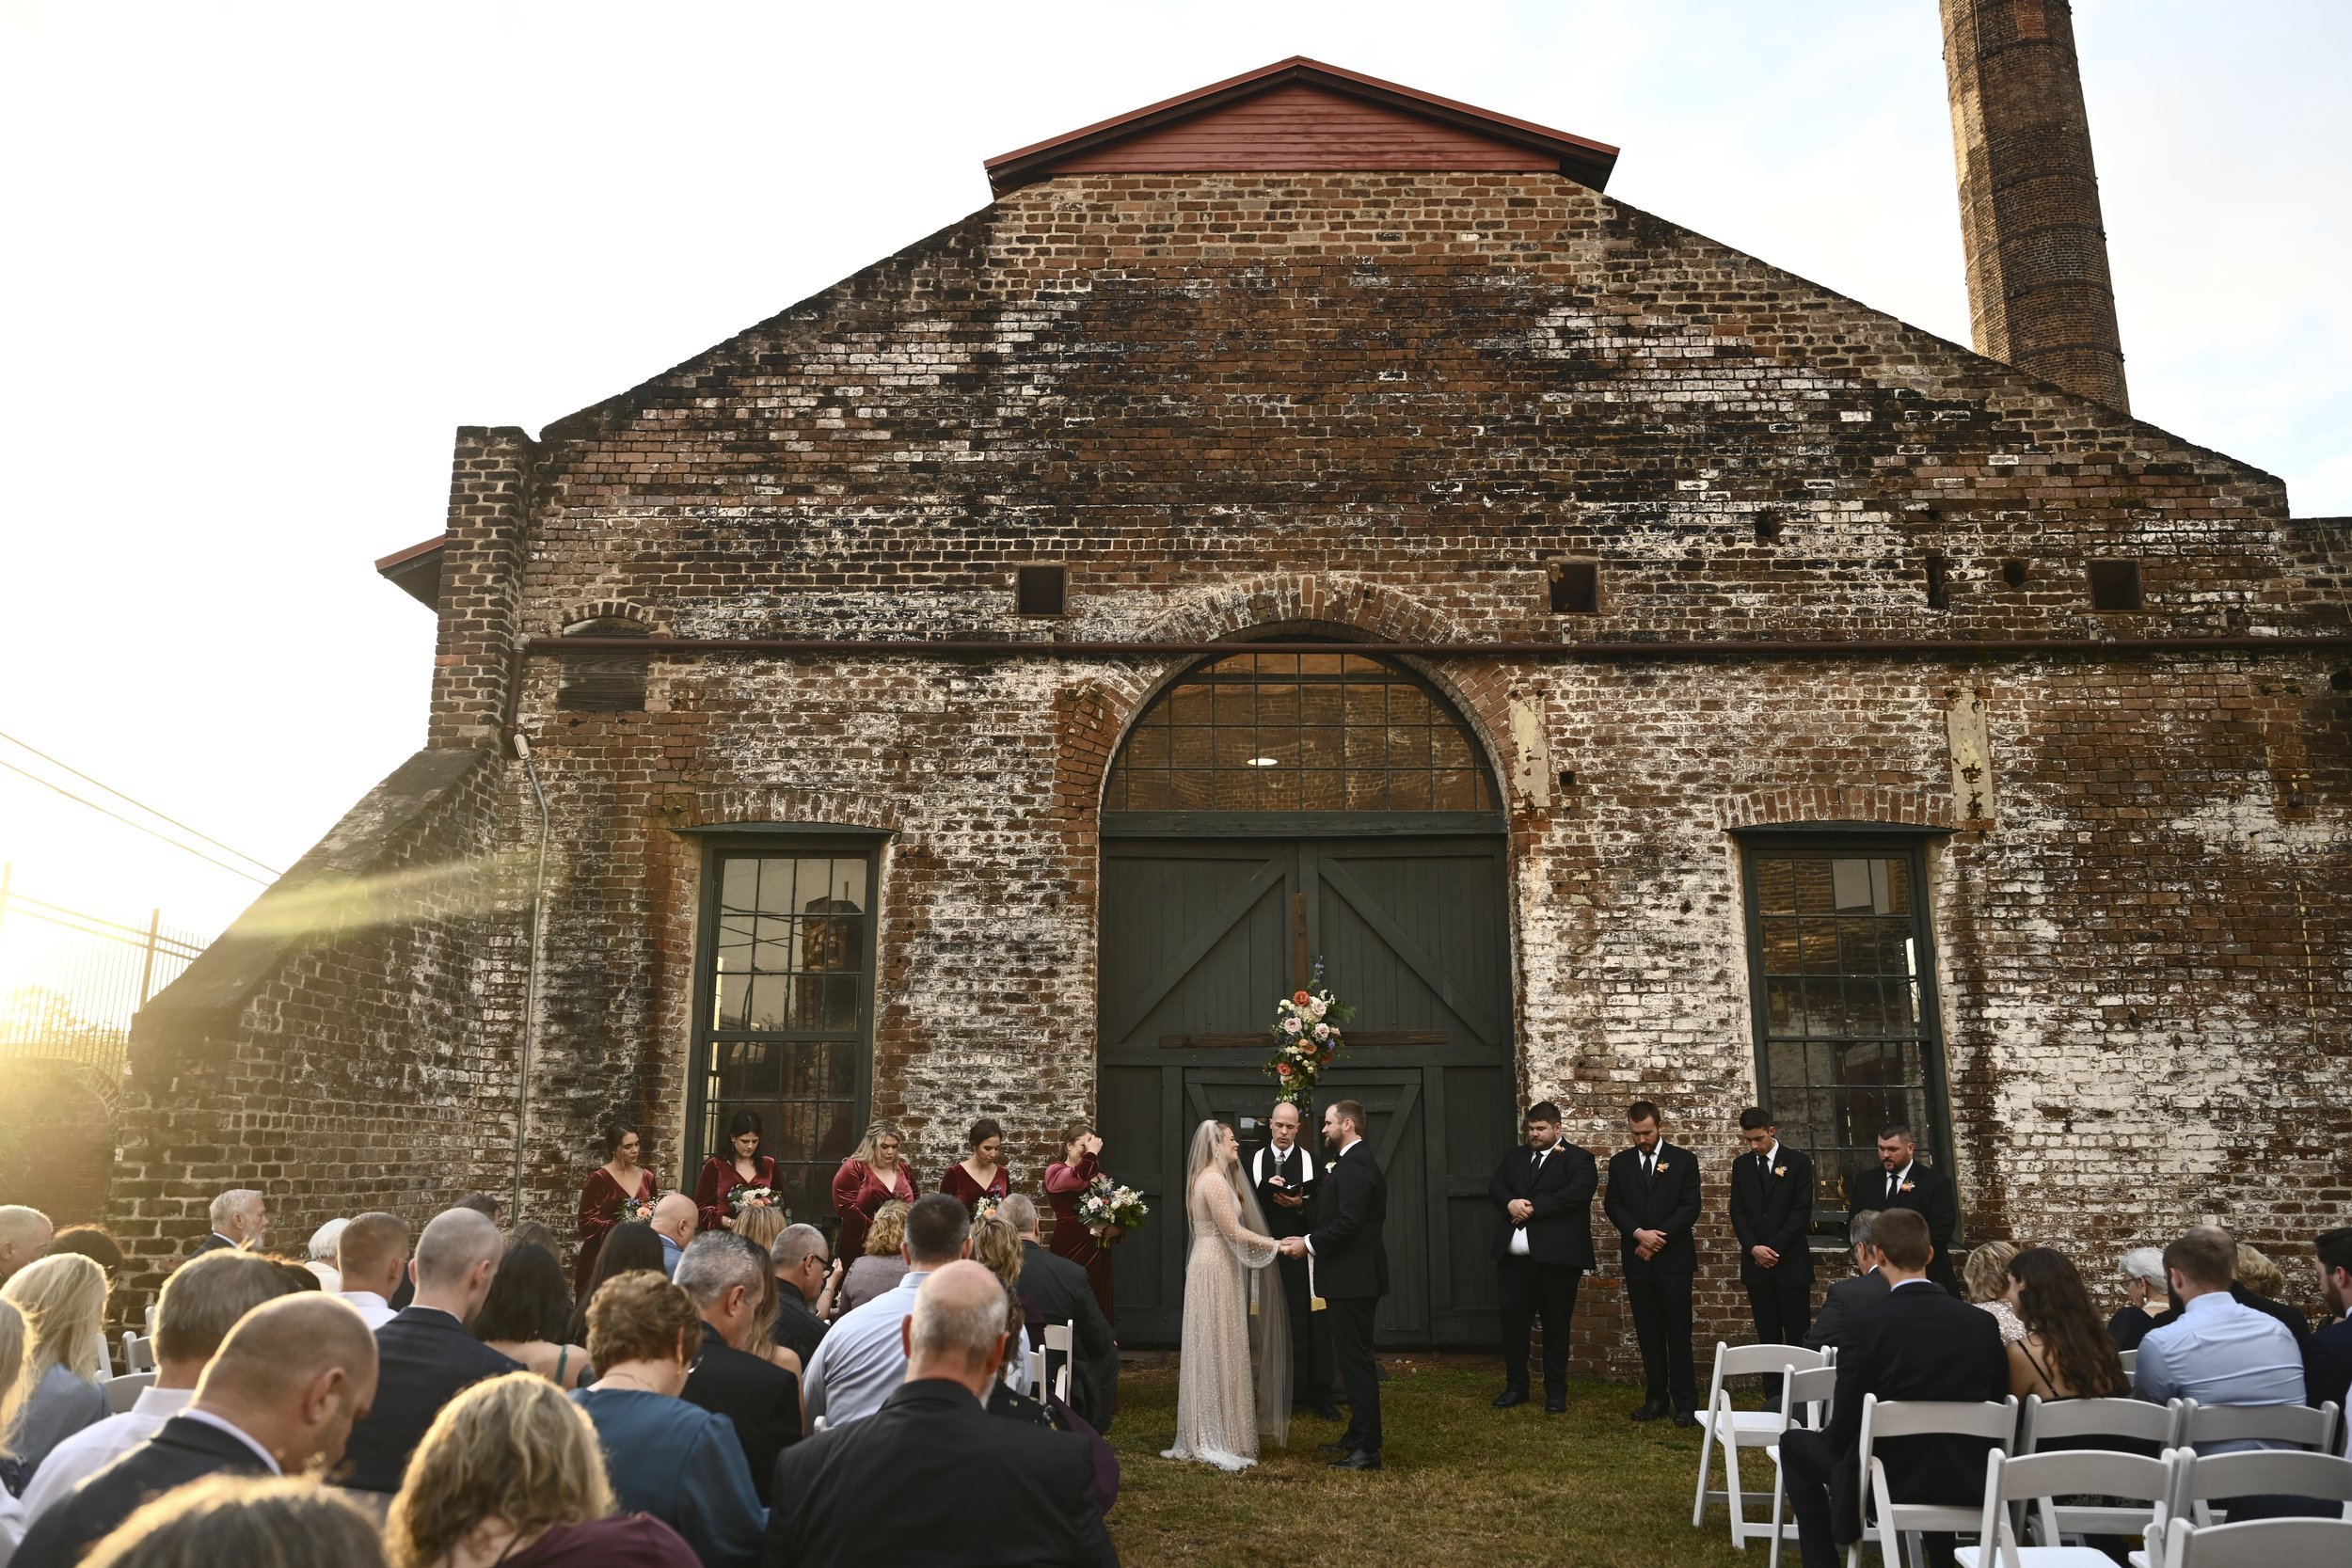 mckenna-and-isaacs-romantic-vintage-inspired-savannah-wedding-at-the-georgia-state-railroad-museum-planned-by-savannah-wedding-planner-ivory-and-beau-savannah-wedding-coordinator-georgia-wedding-planner-destination-wedding-planner-12.JPG